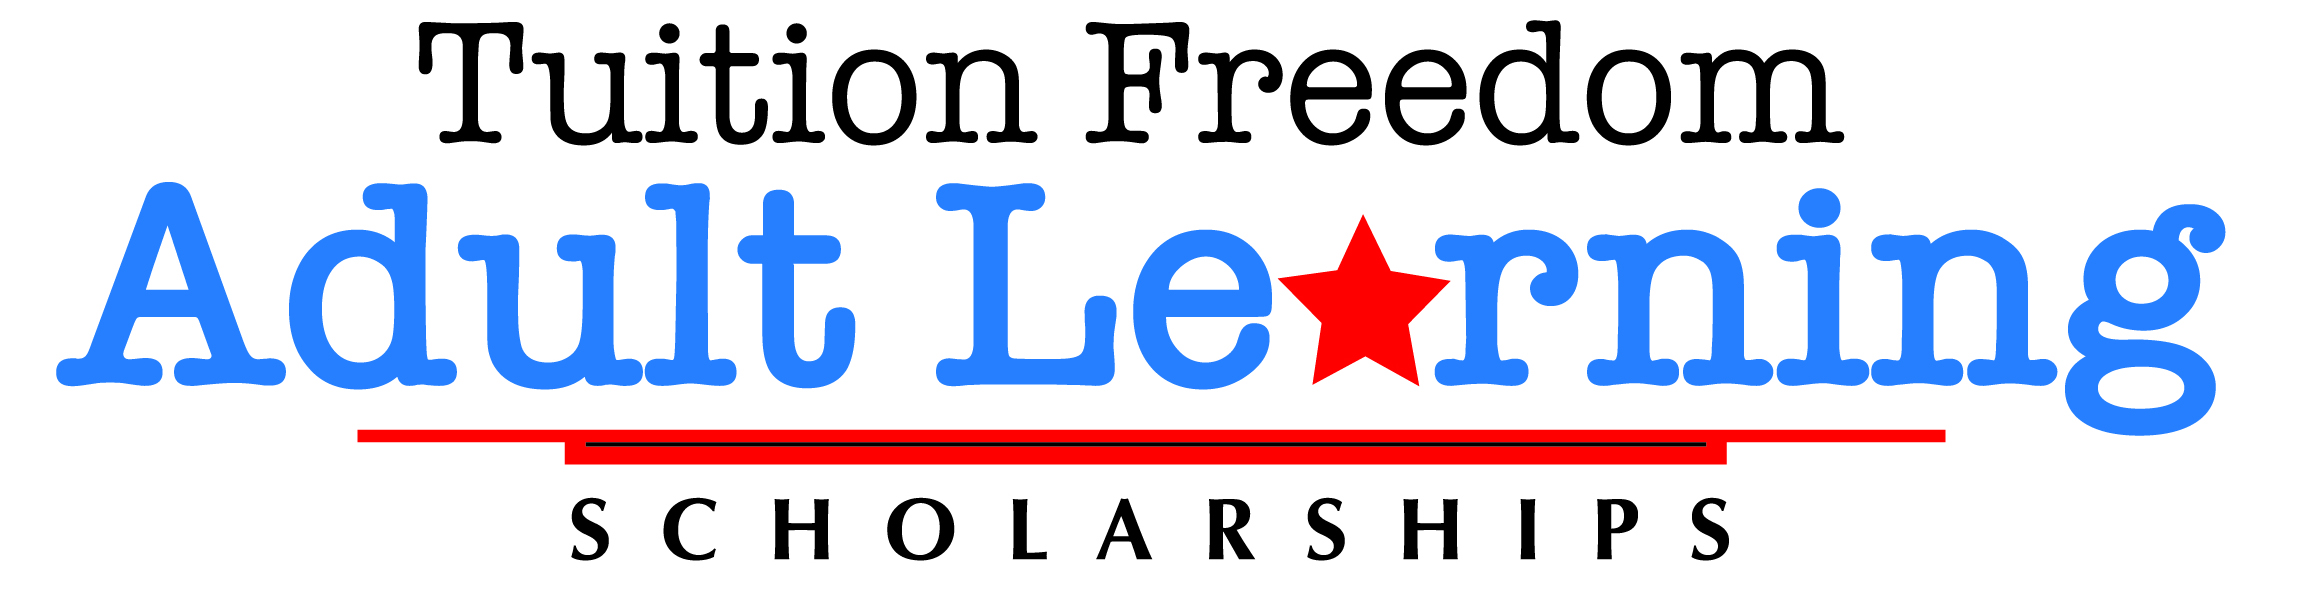 Logo for tuition freedom for adults scholarship.